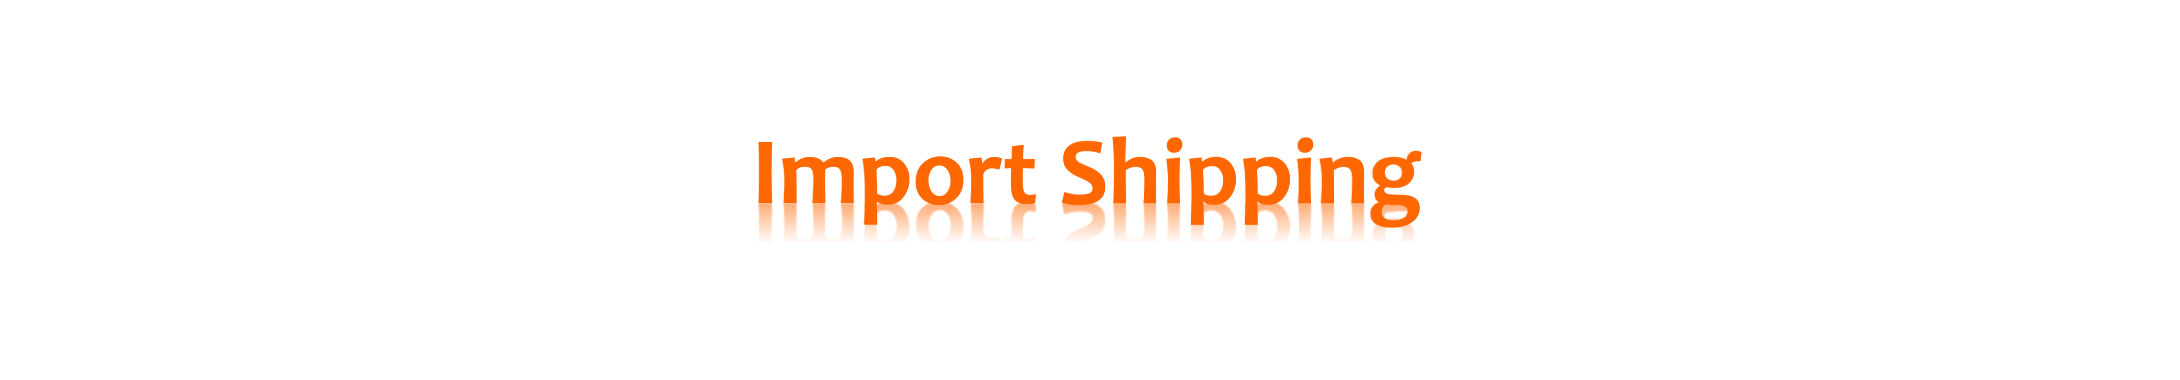 import shipping